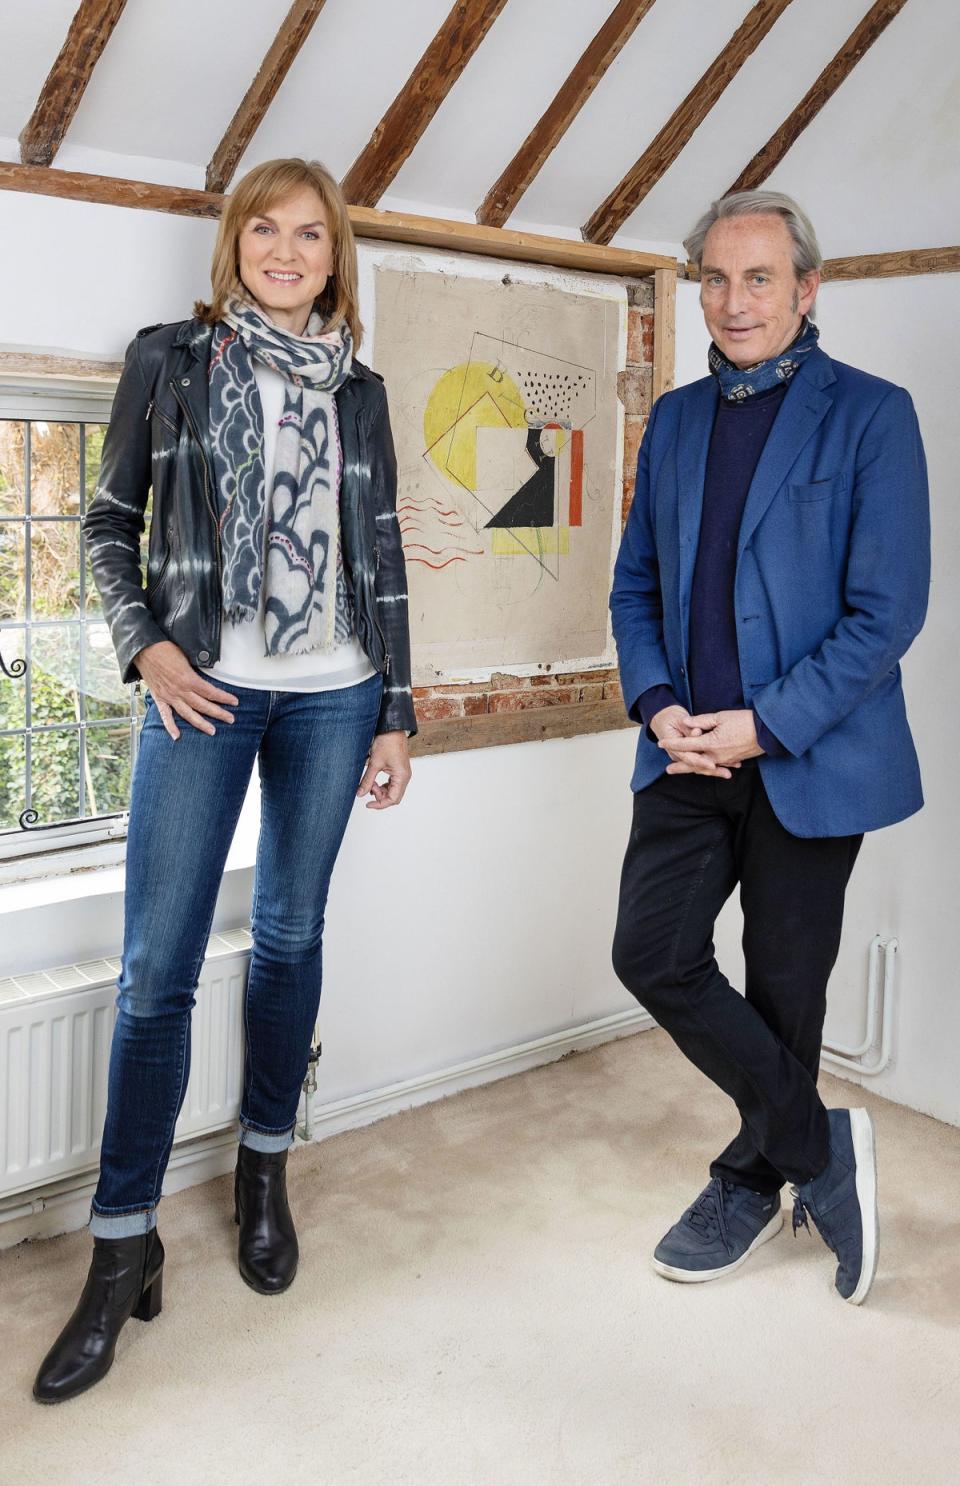 Fake or Fortune S10,Nicholson,1,Fiona Bruce, Philip Mould,Picture shows: Fiona Bruce and Philip Mould at Red Stream Cottage with possible Ben Nicholson wall painting.,BBC Studios,Anna Gordon